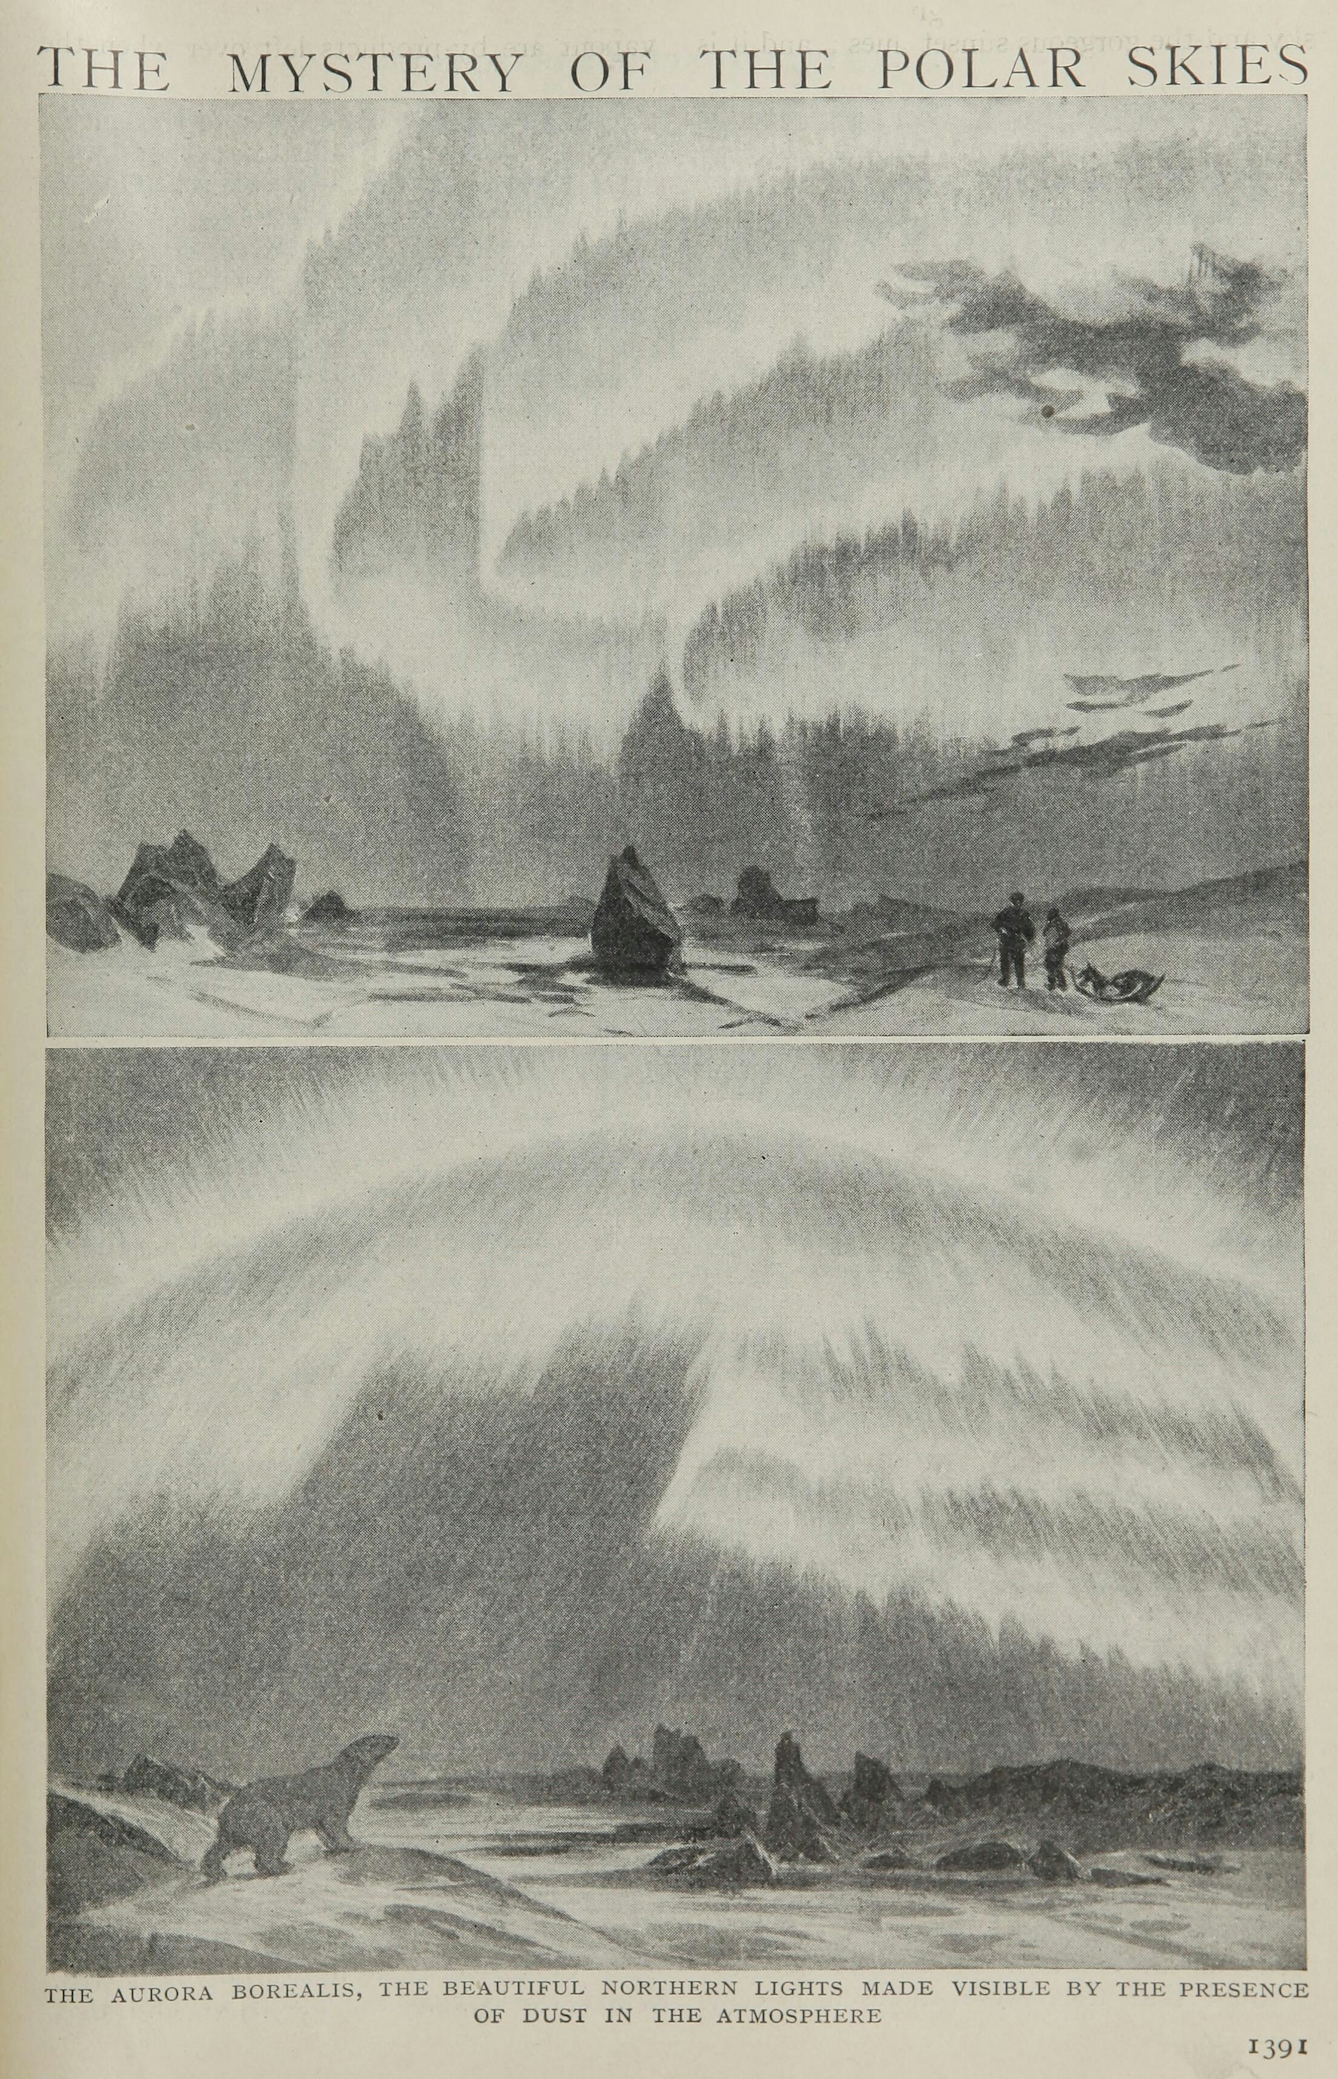 Writing about the northern lights was often couched in terms of their mystery, even in scientific publications.